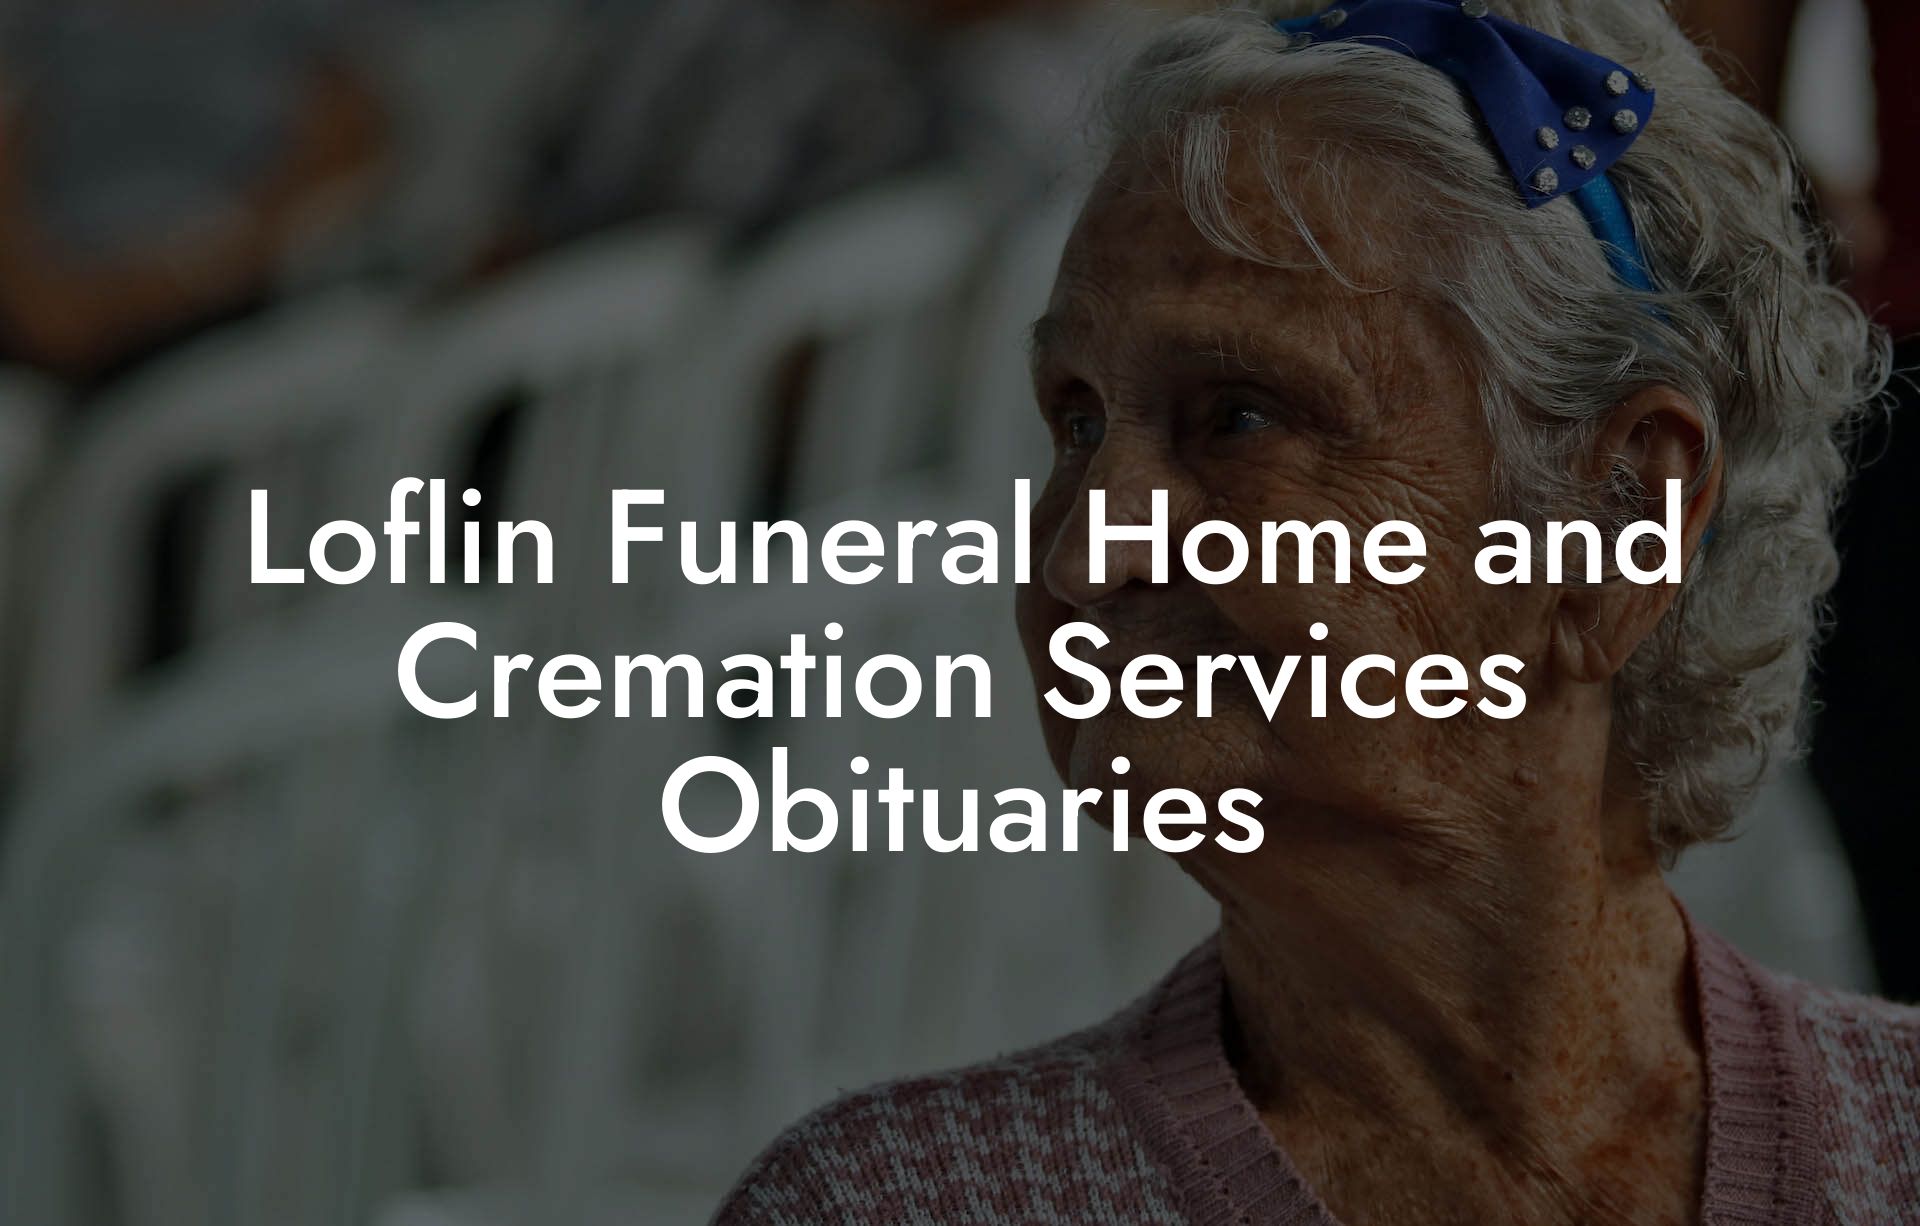 Loflin Funeral Home and Cremation Services Obituaries